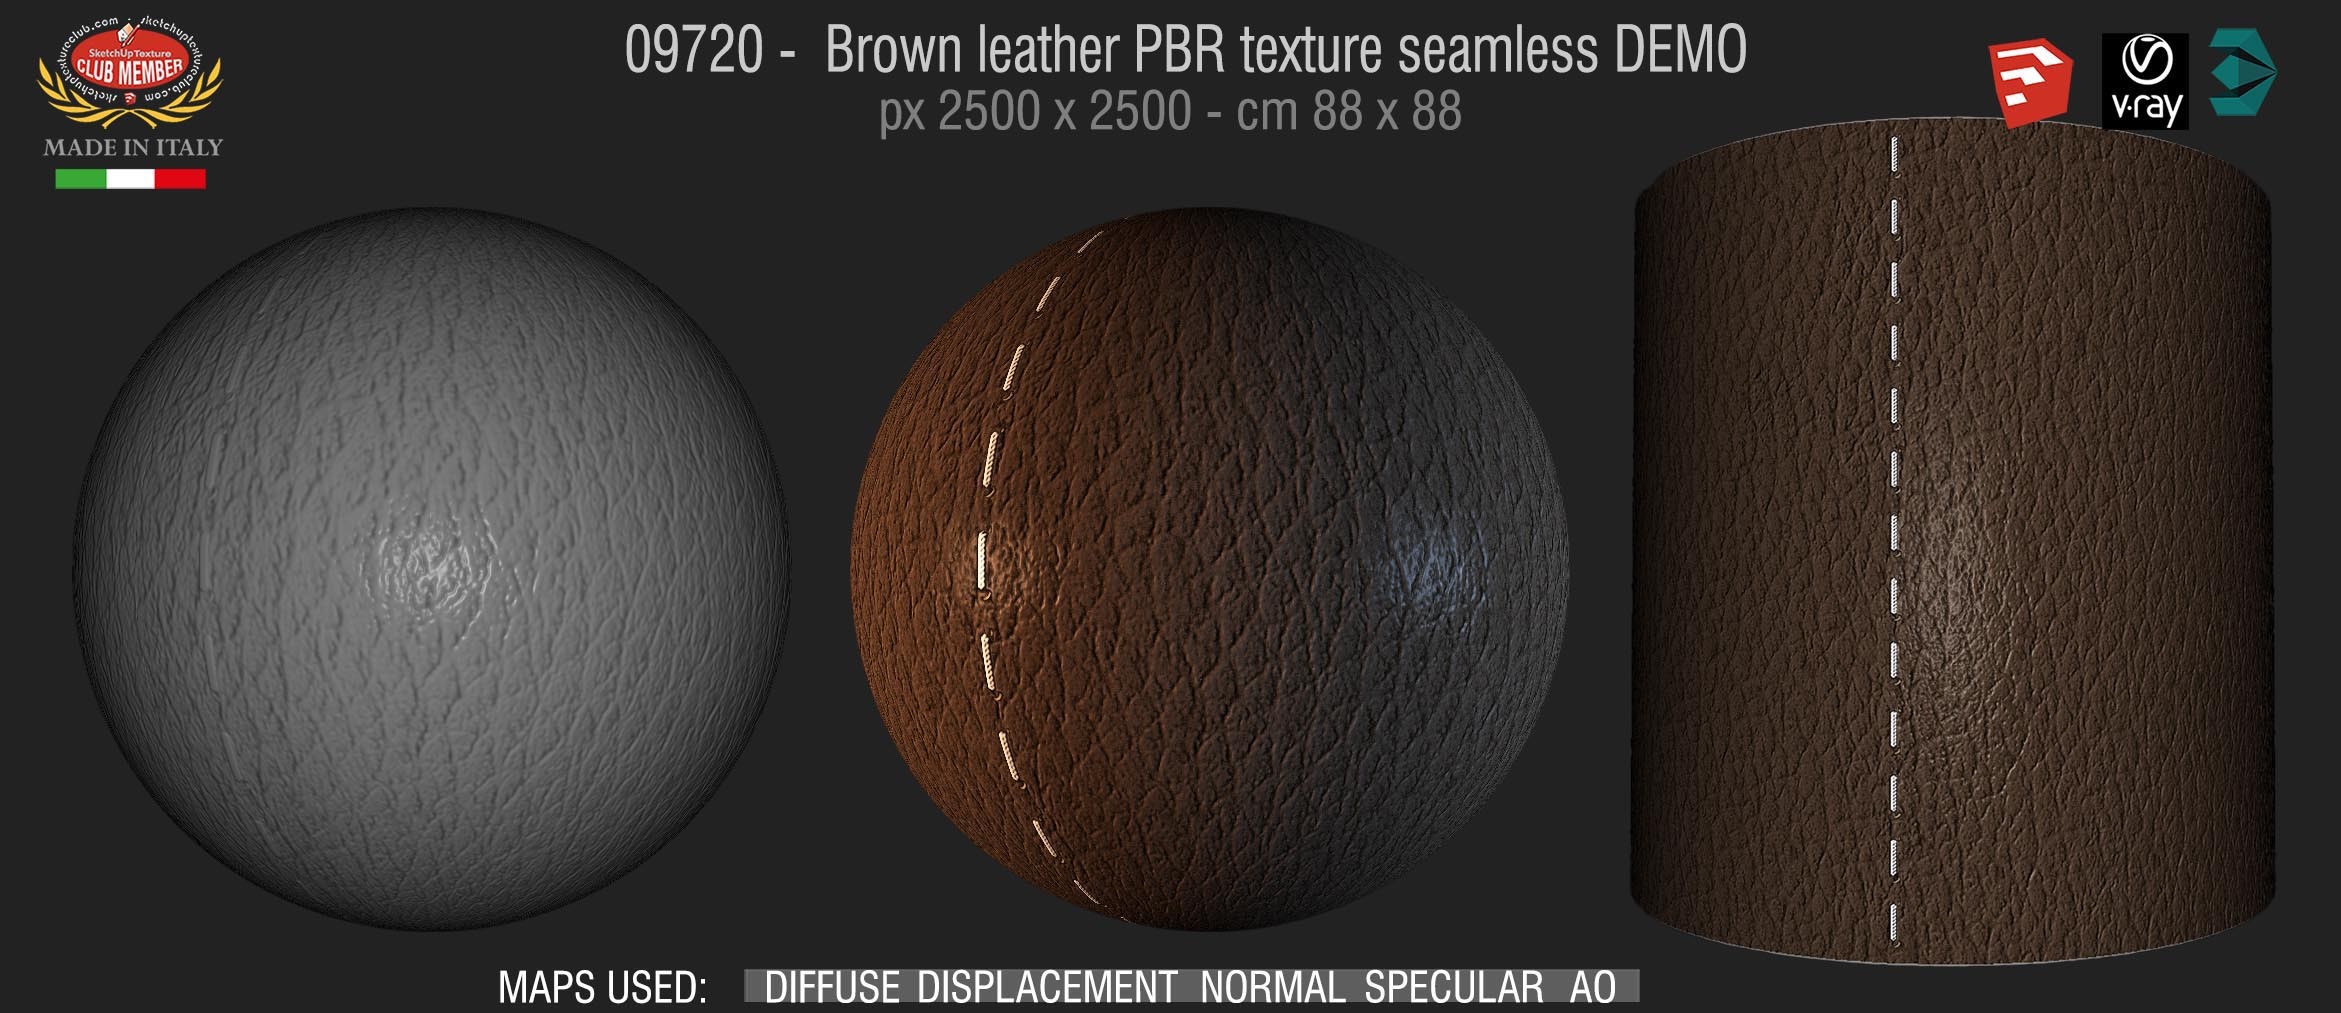 09720 Brown leather PBR texture seamless DEMO